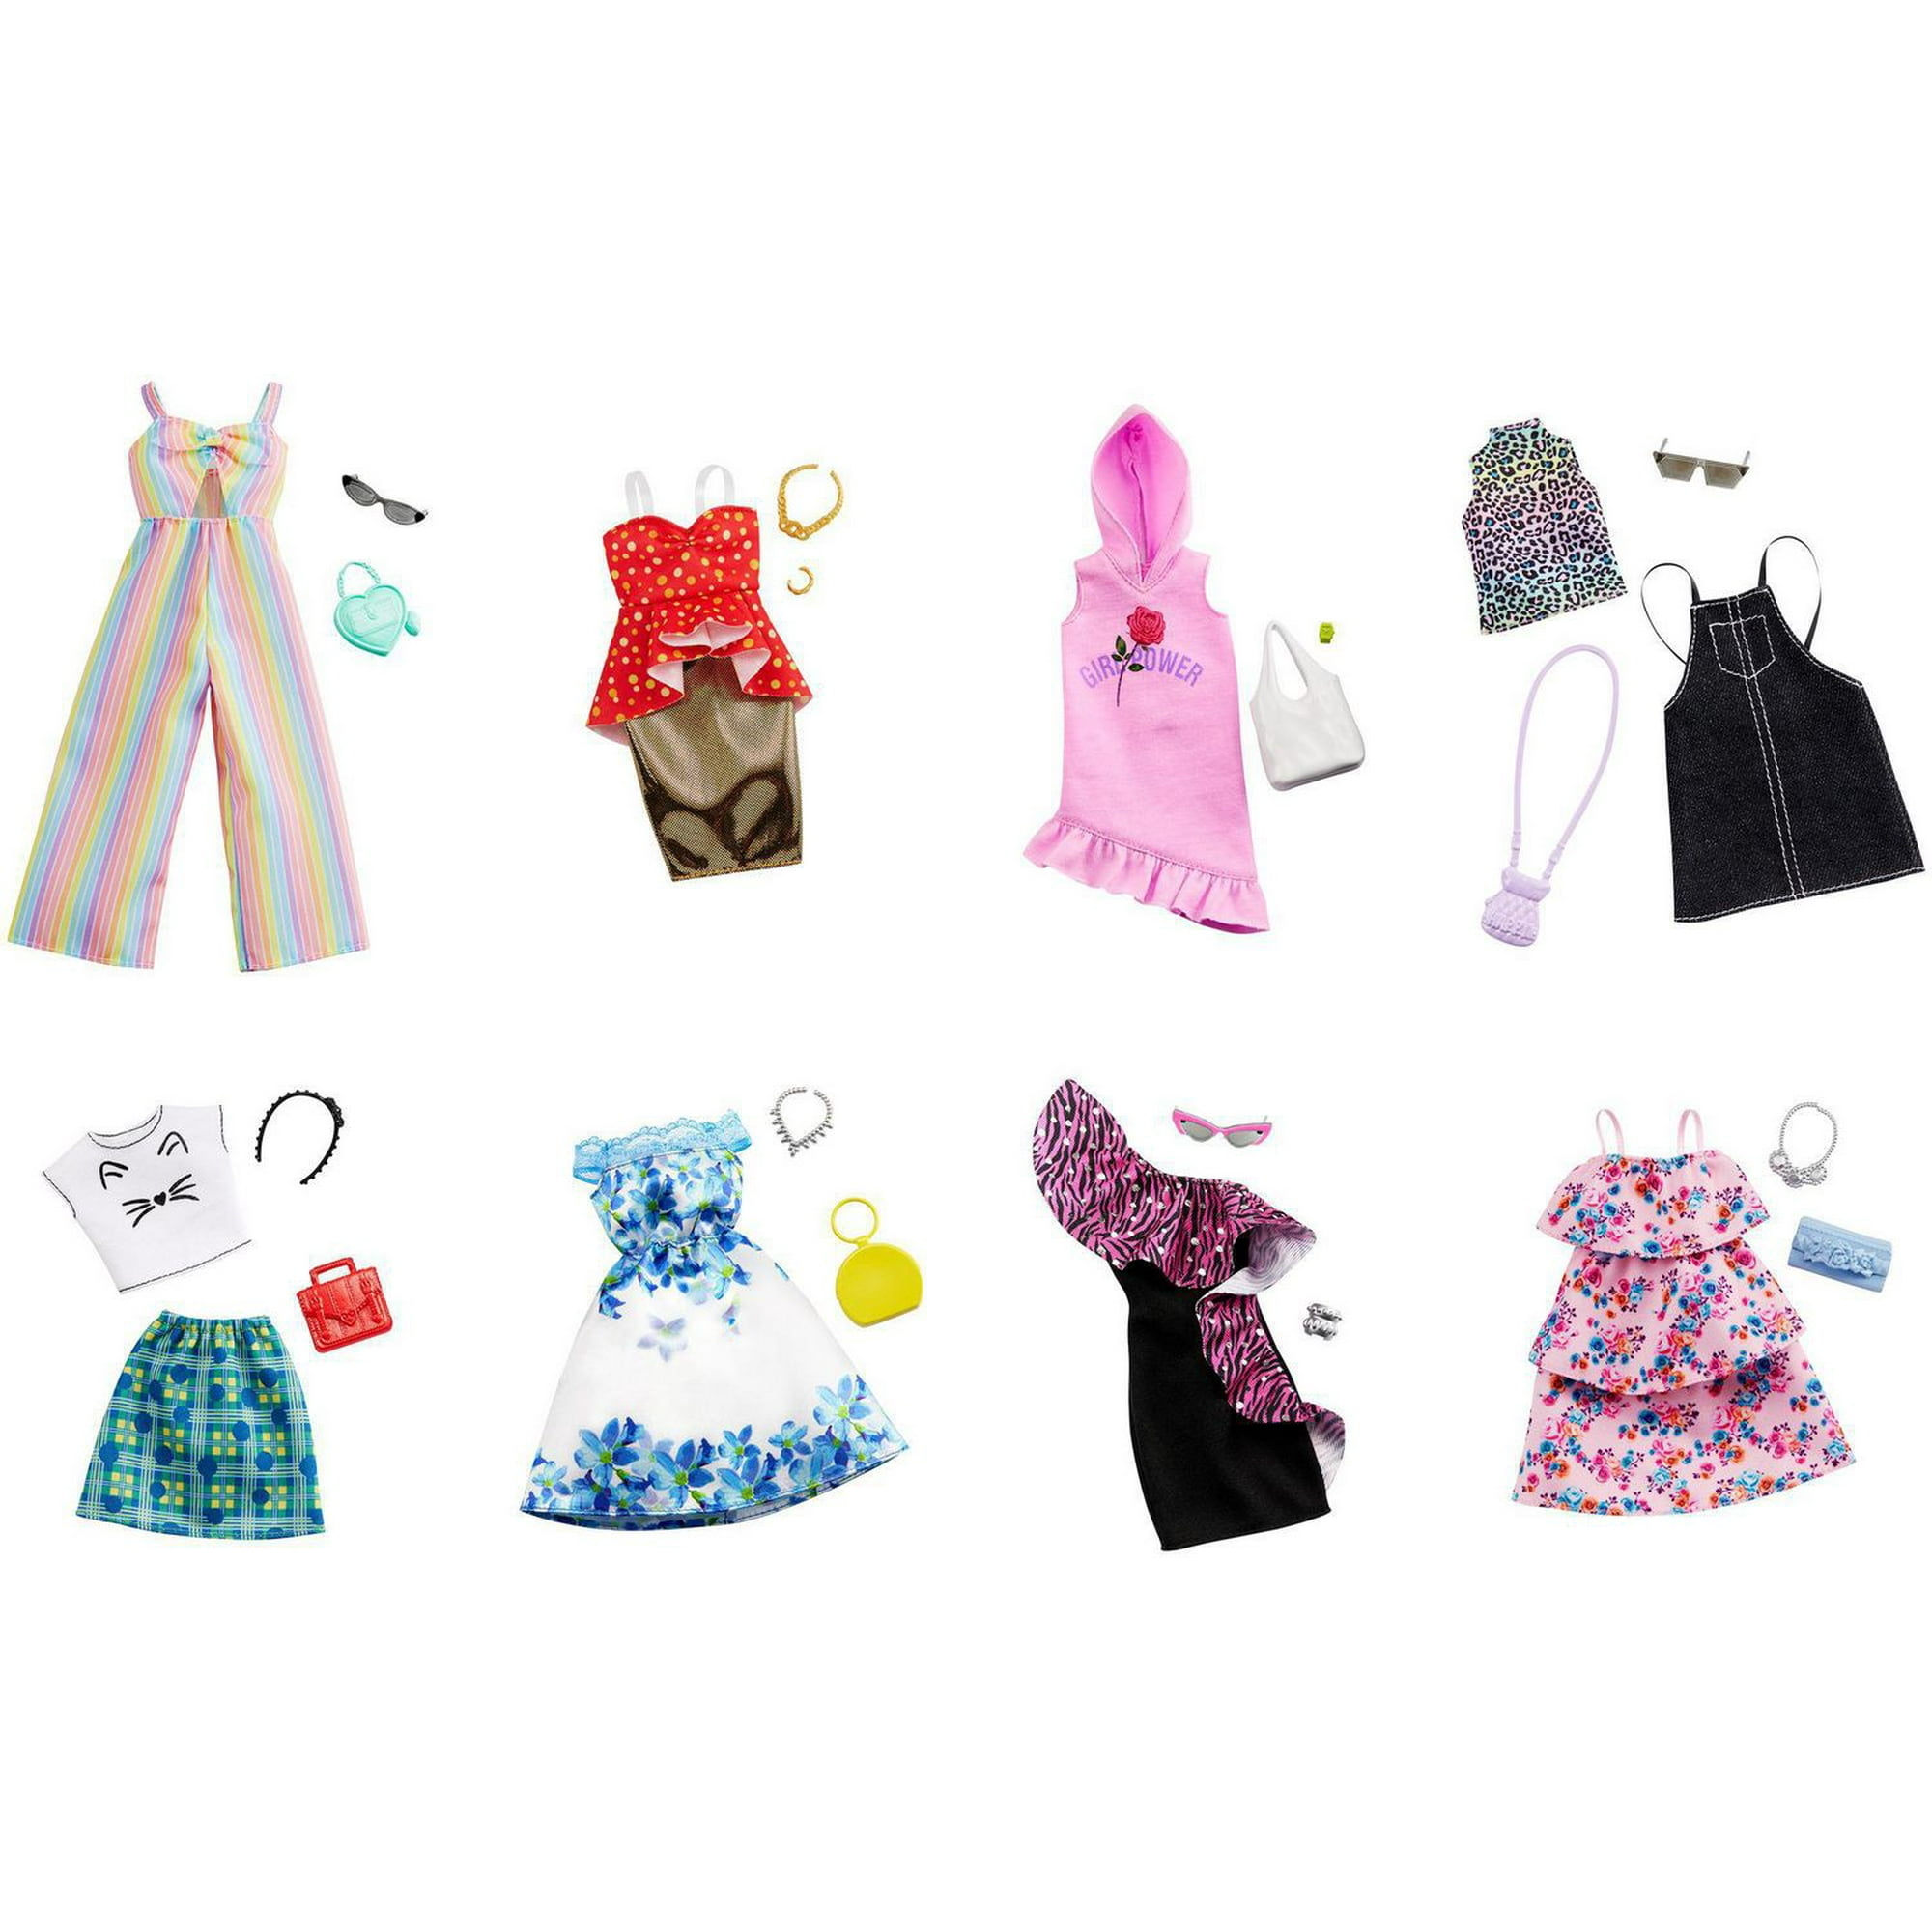 Barbie Fashion Assortment of Doll Clothes 